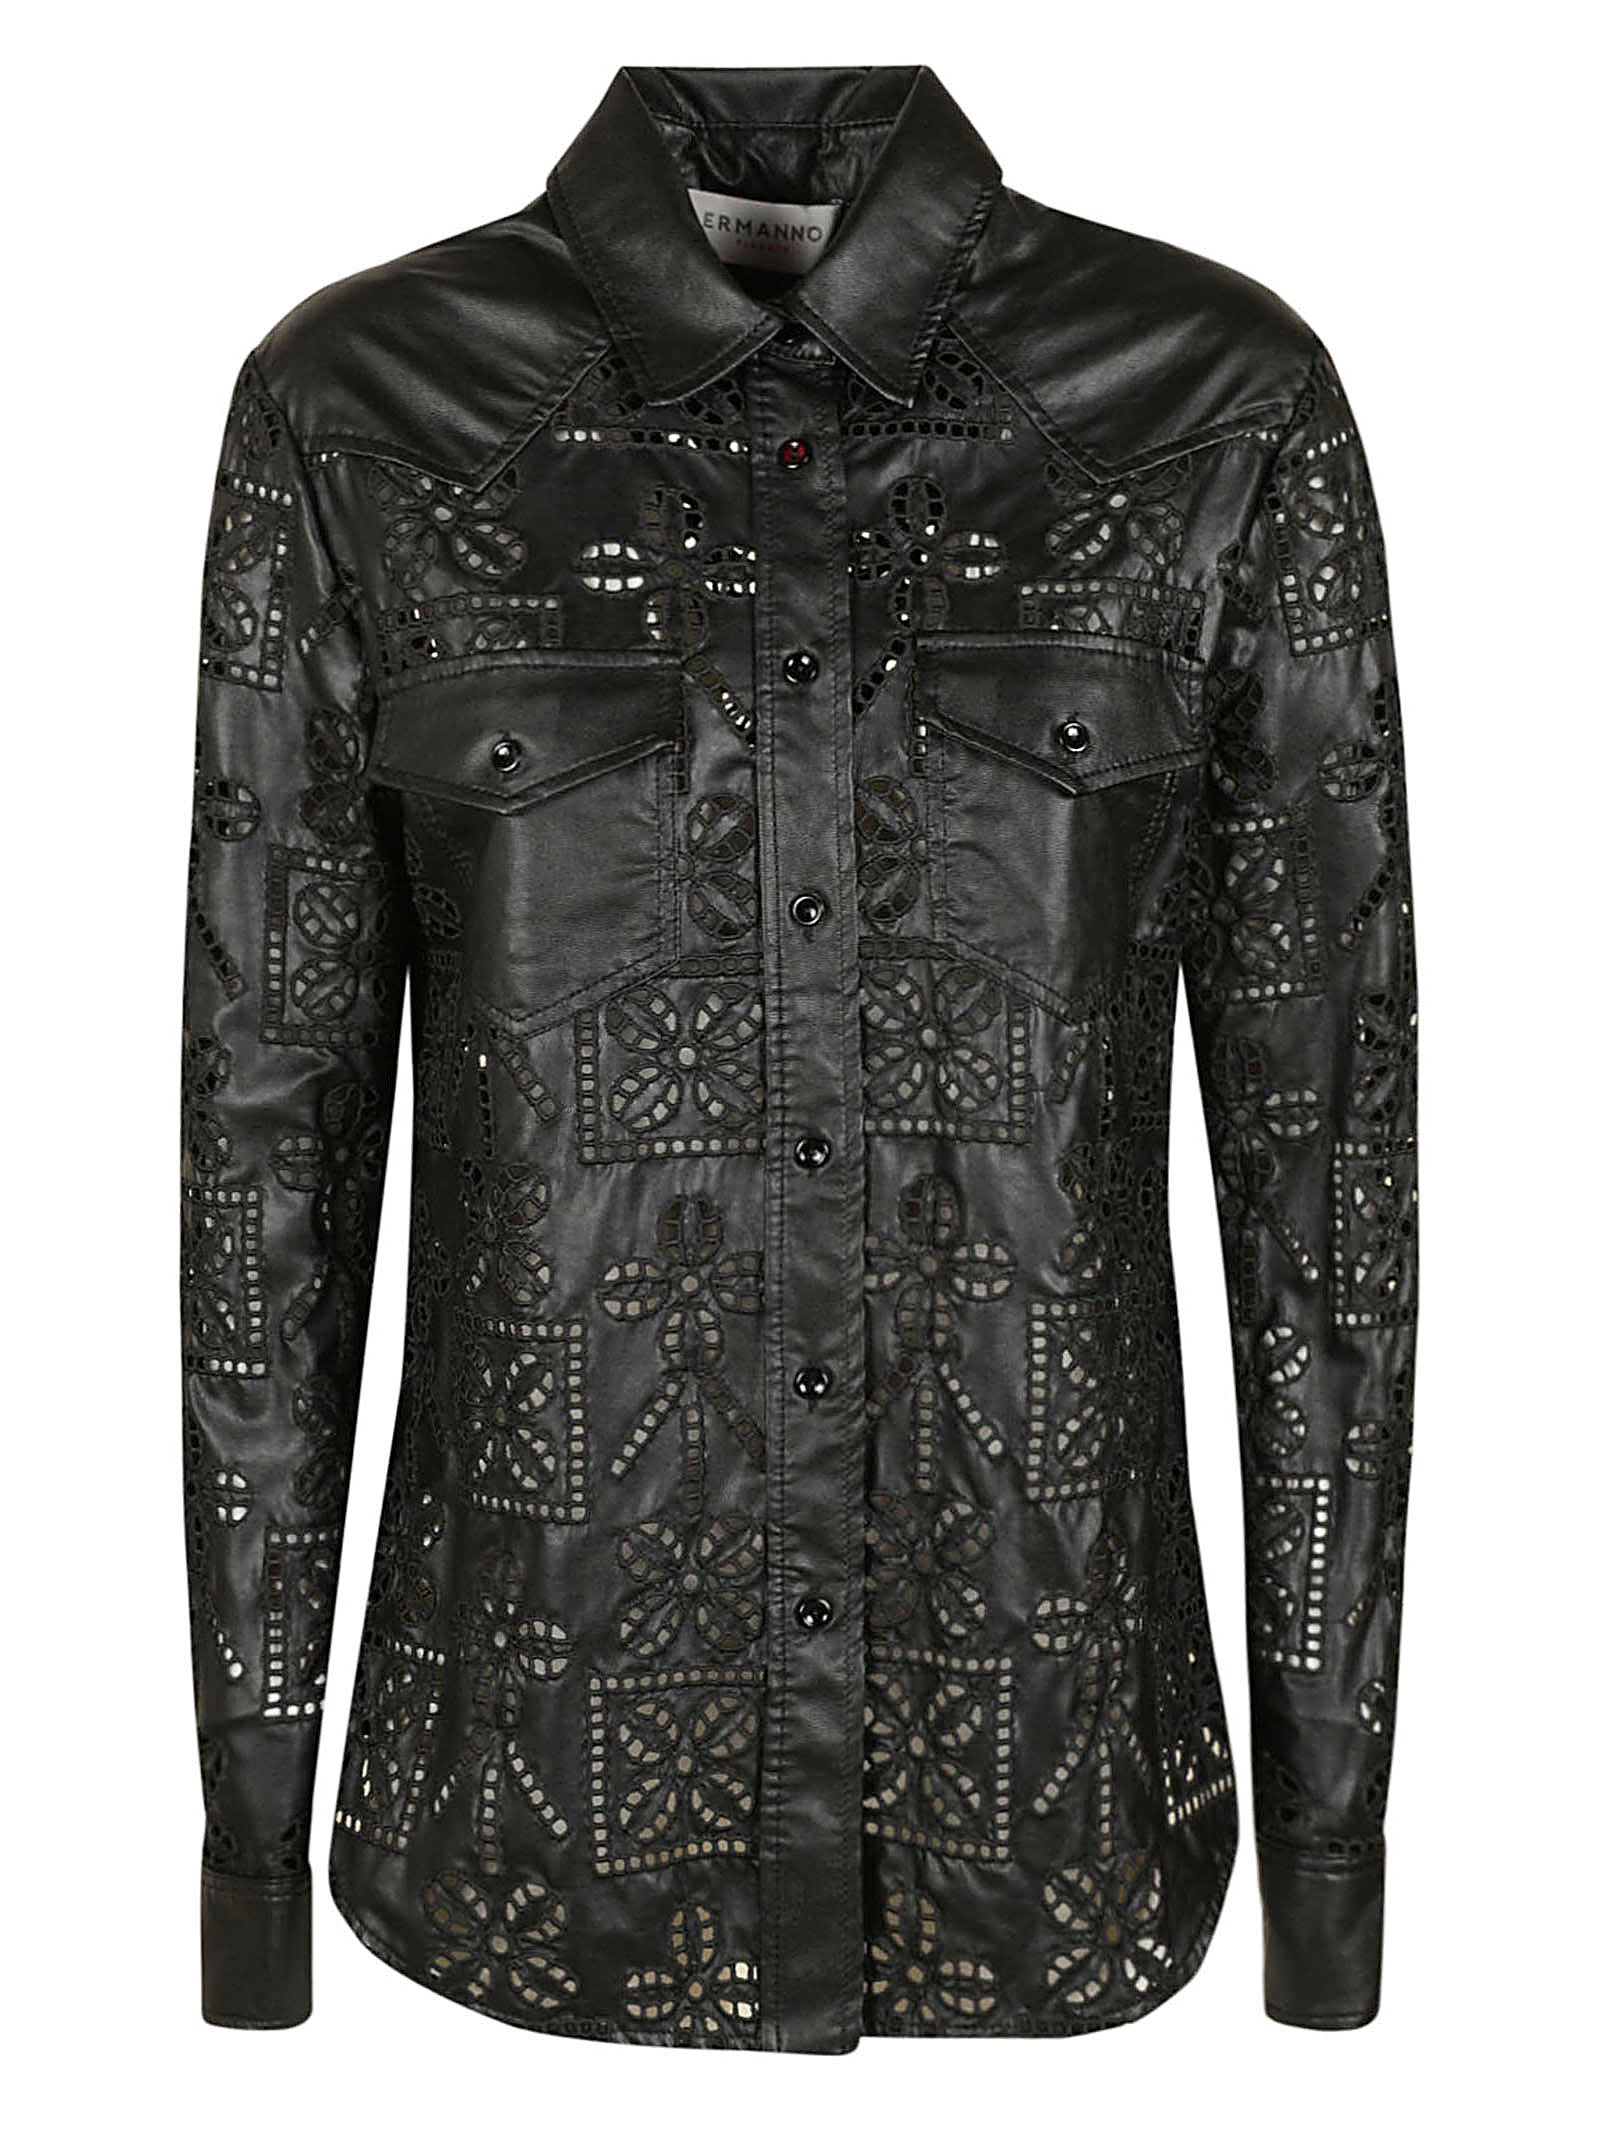 Ermanno Scervino Pattern Perforated Shirt